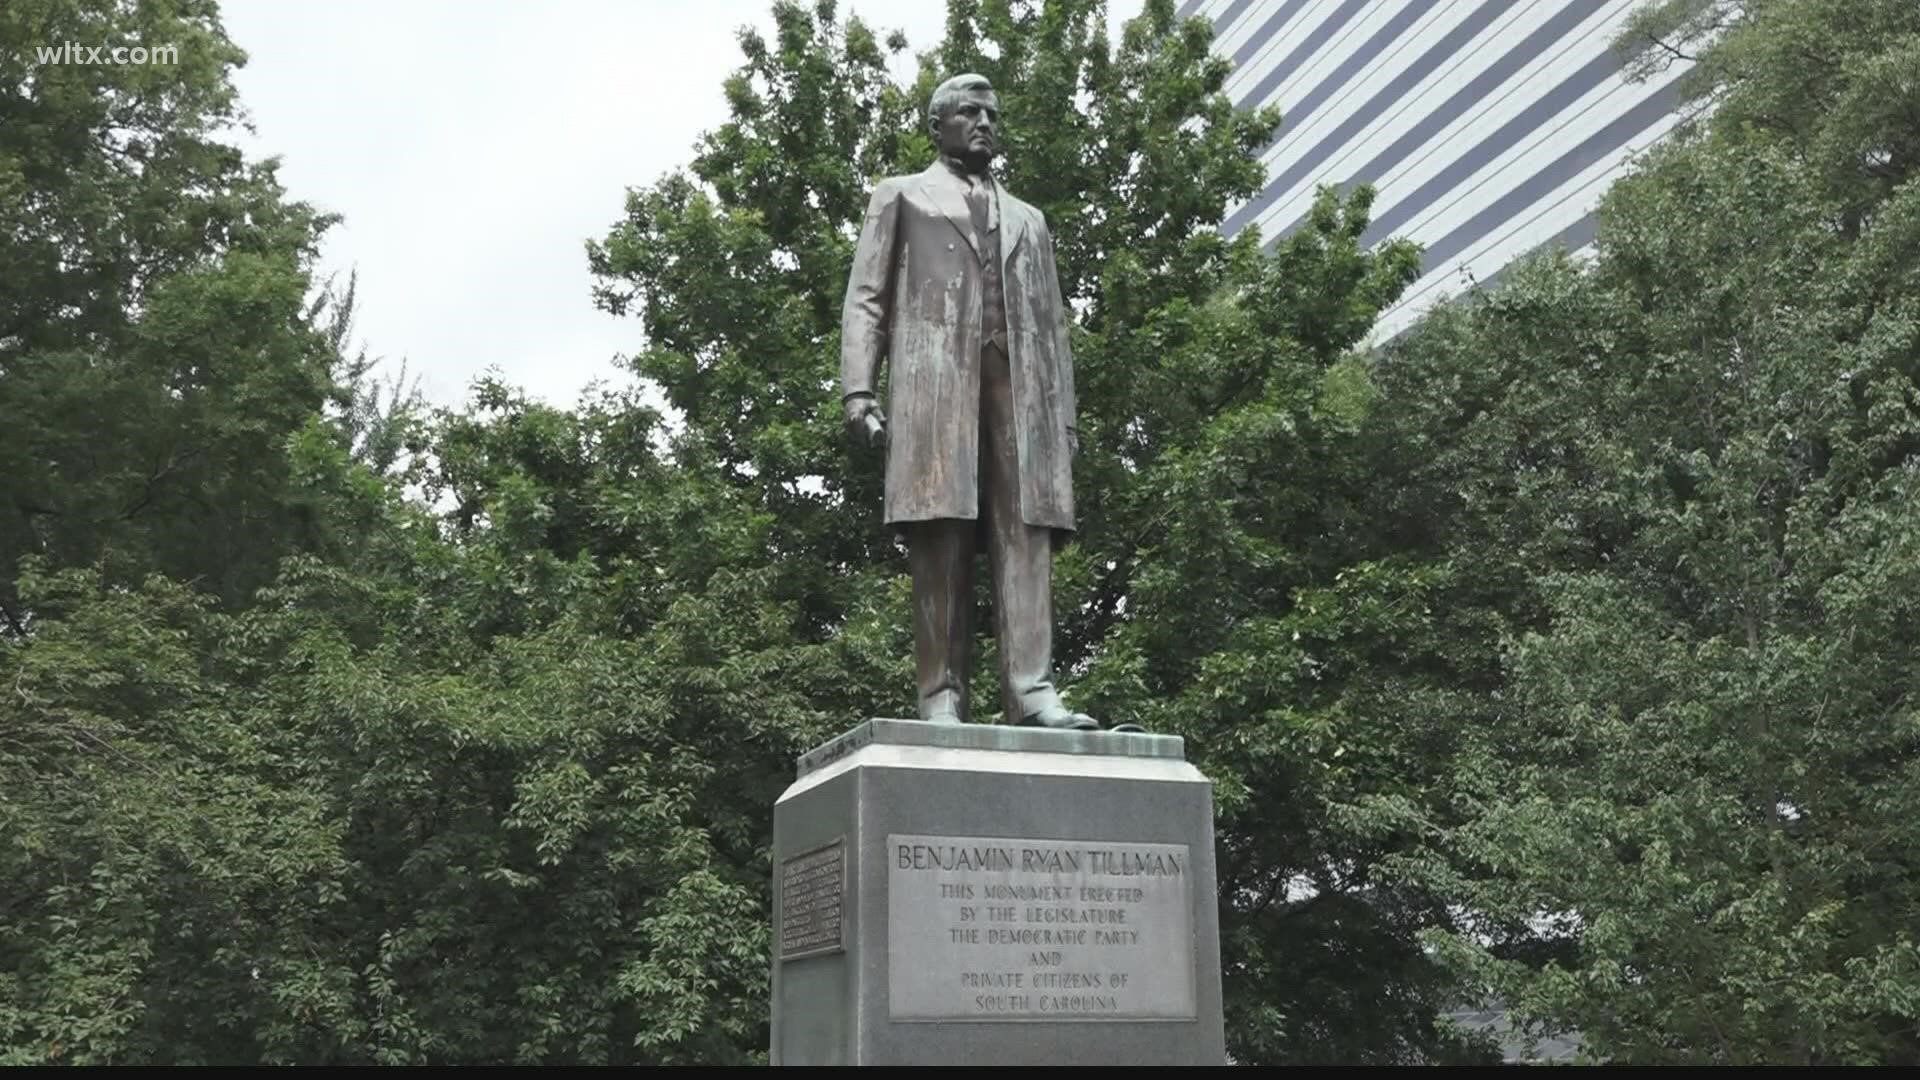 The SC Supreme Court says the state's Heritage Act is legal, but struck down a portion of it that made it nearly impossible to take down statues or rename buildings.